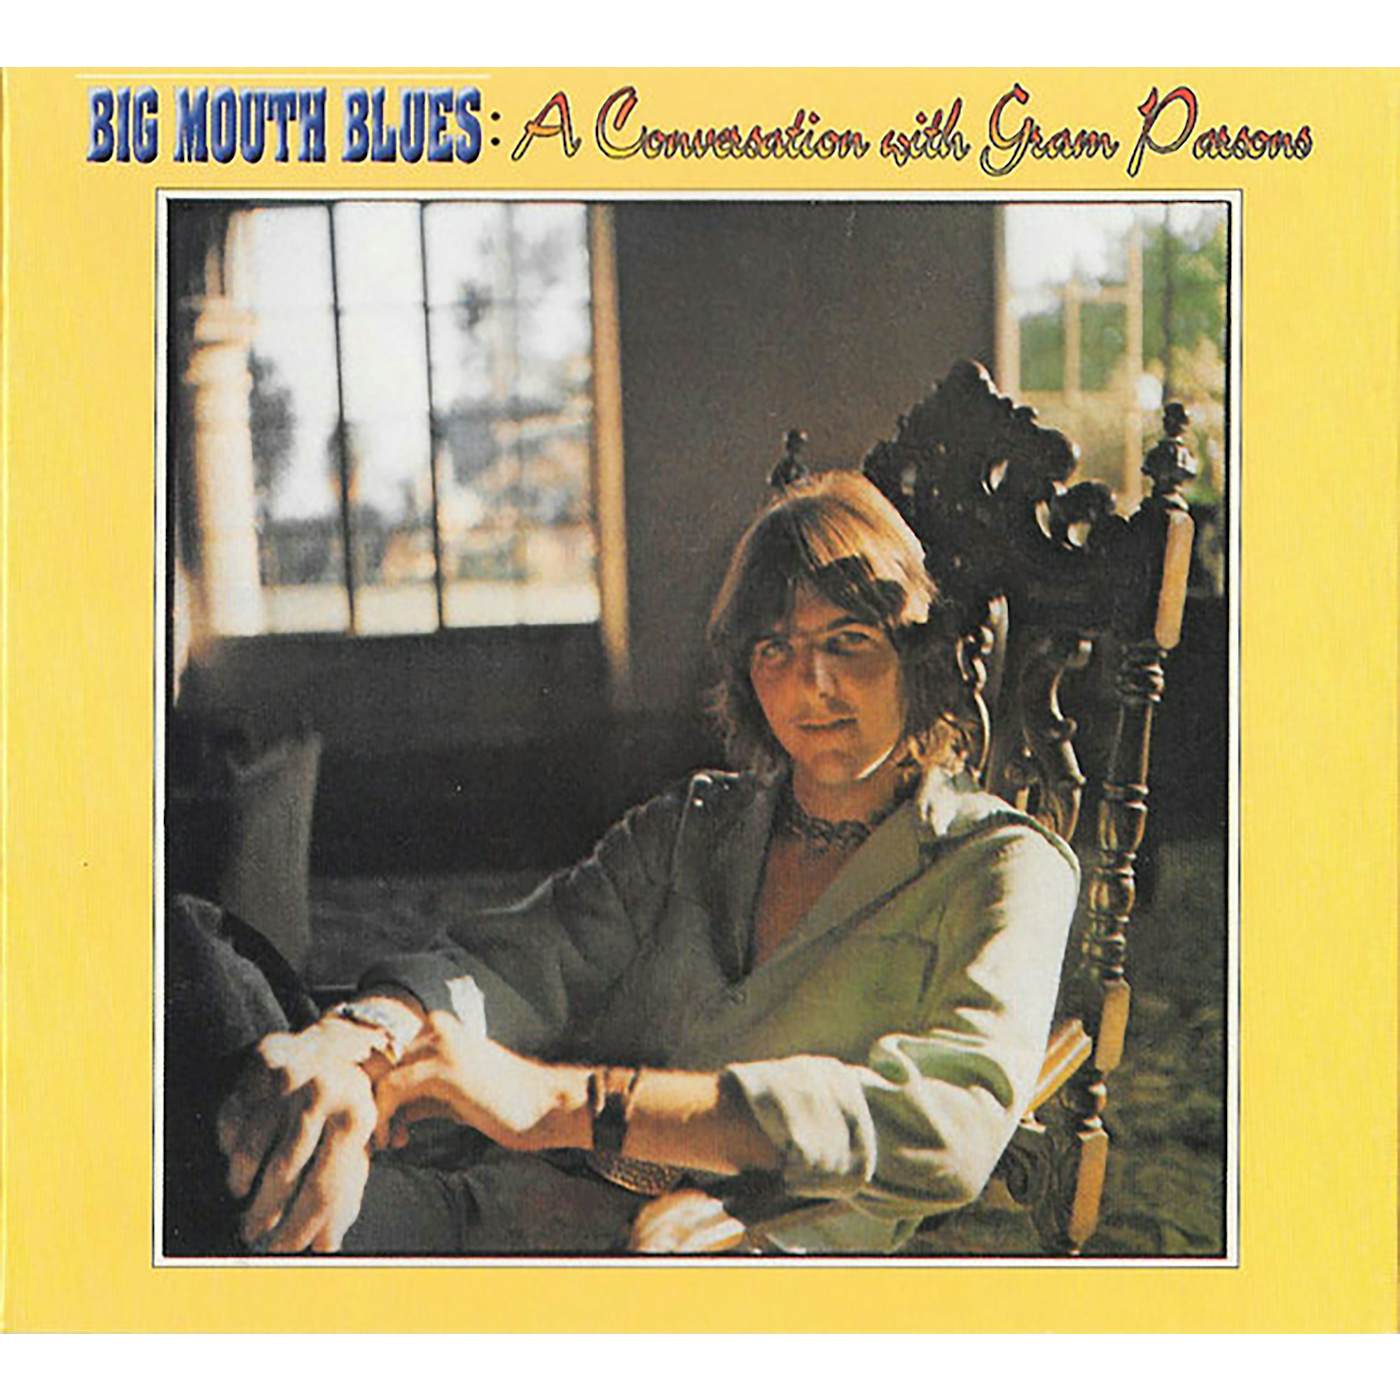 BIG MOUTH BLUES: A CONVERSATION WITH GRAM PARSONS CD